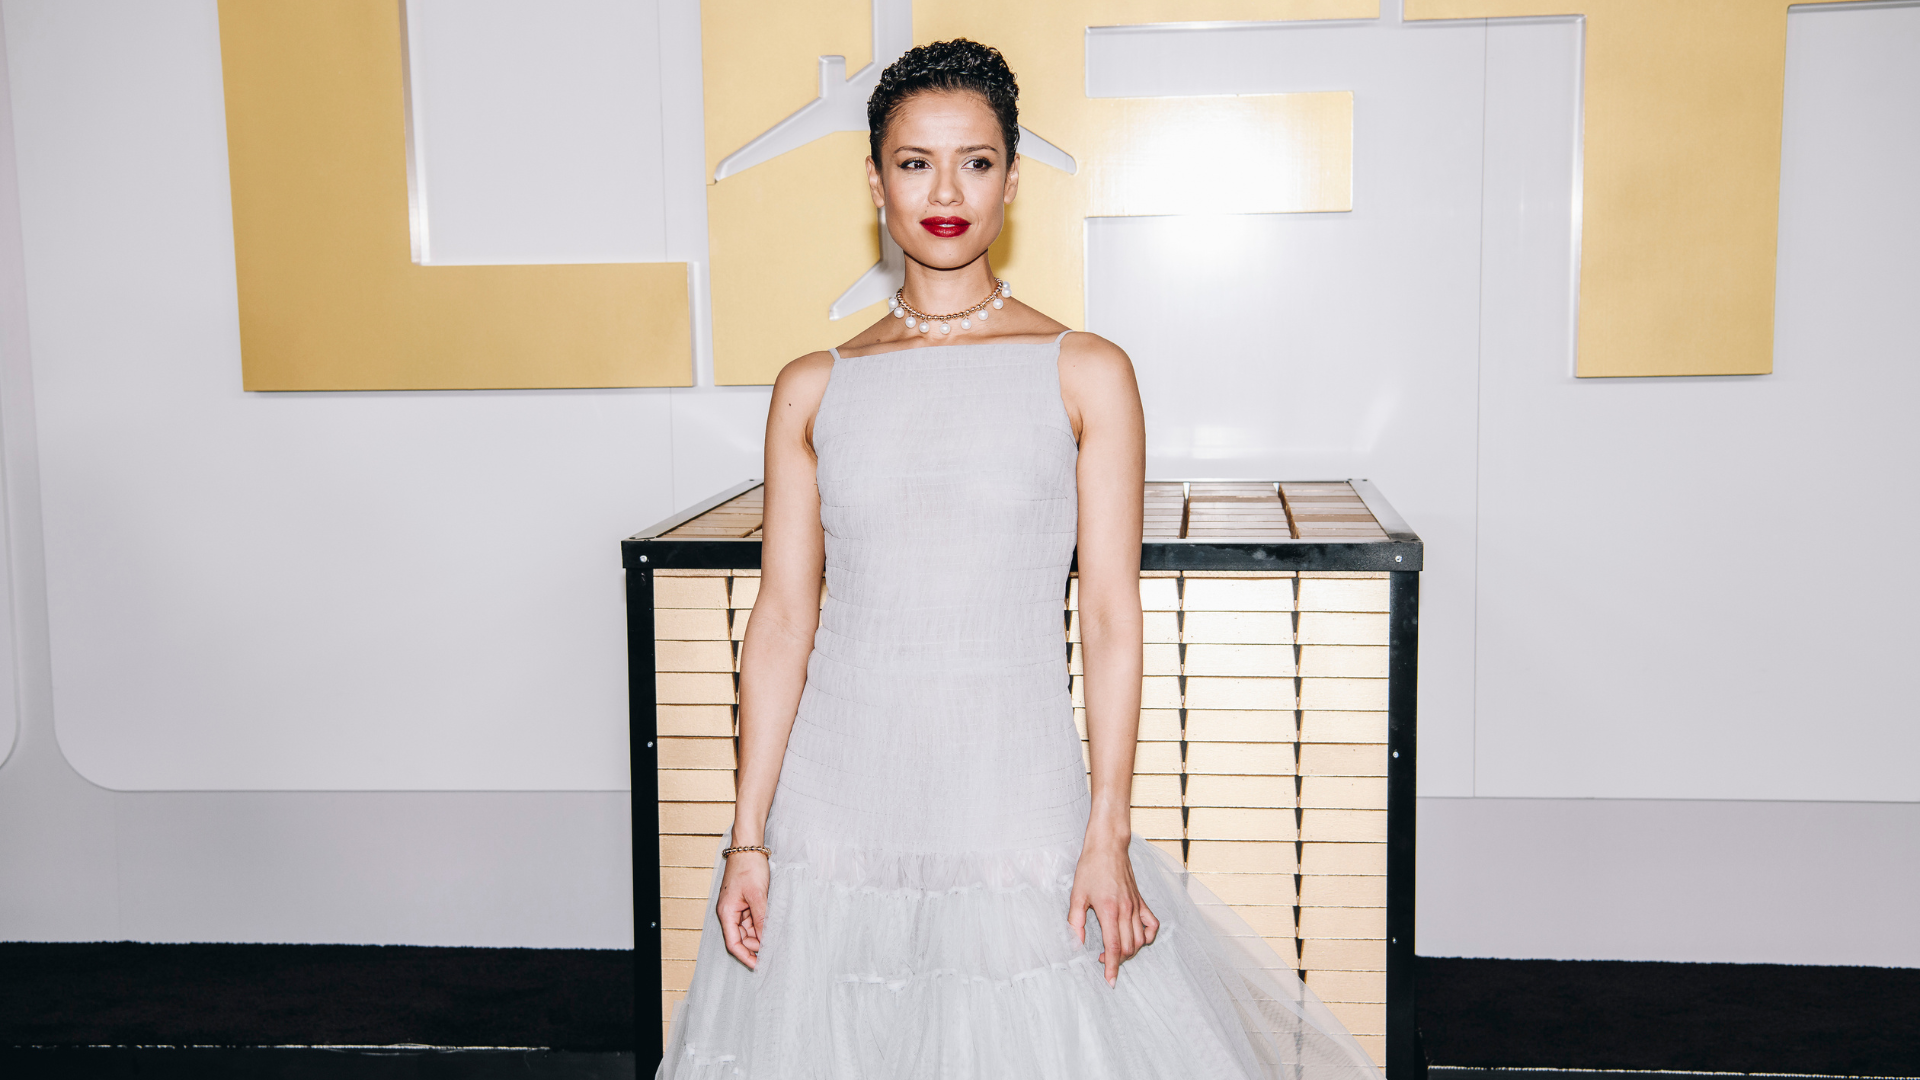 Gugu Mbatha-Raw Was Insanely Chic At The New York City 'Lift' Premiere